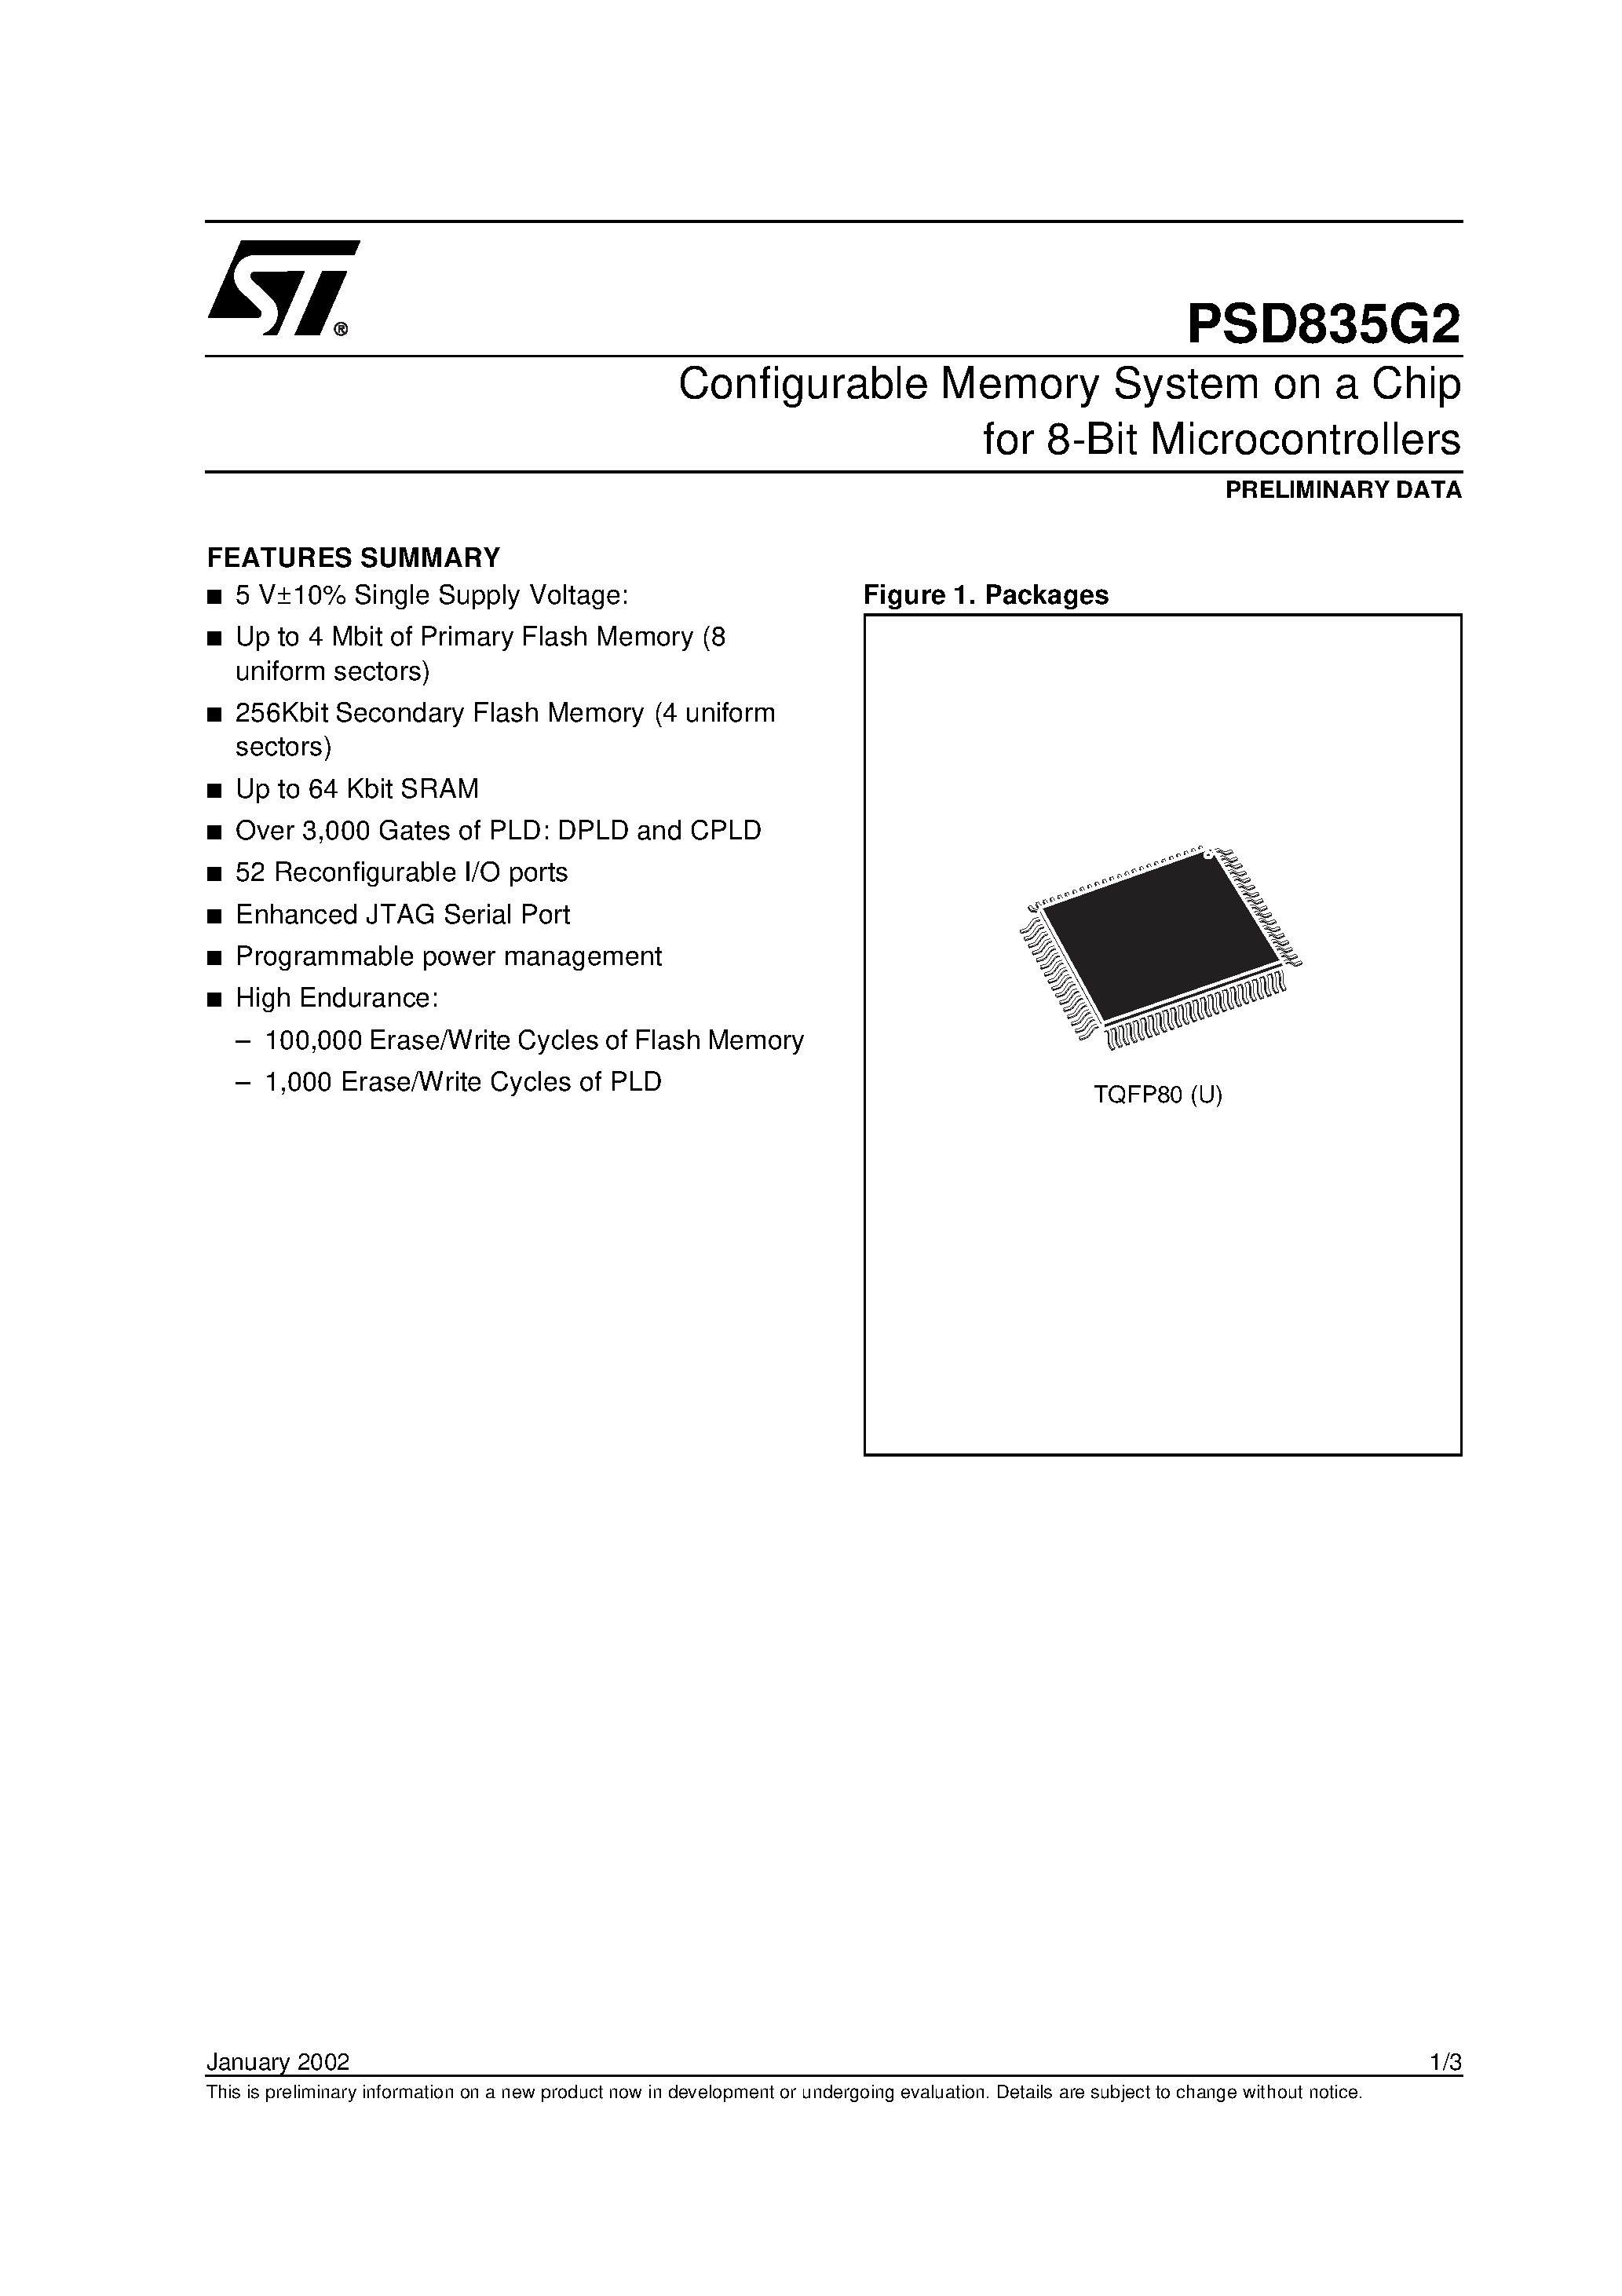 Datasheet PSD835F2V-A-15JI - Configurable Memory System on a Chip for 8-Bit Microcontrollers page 1